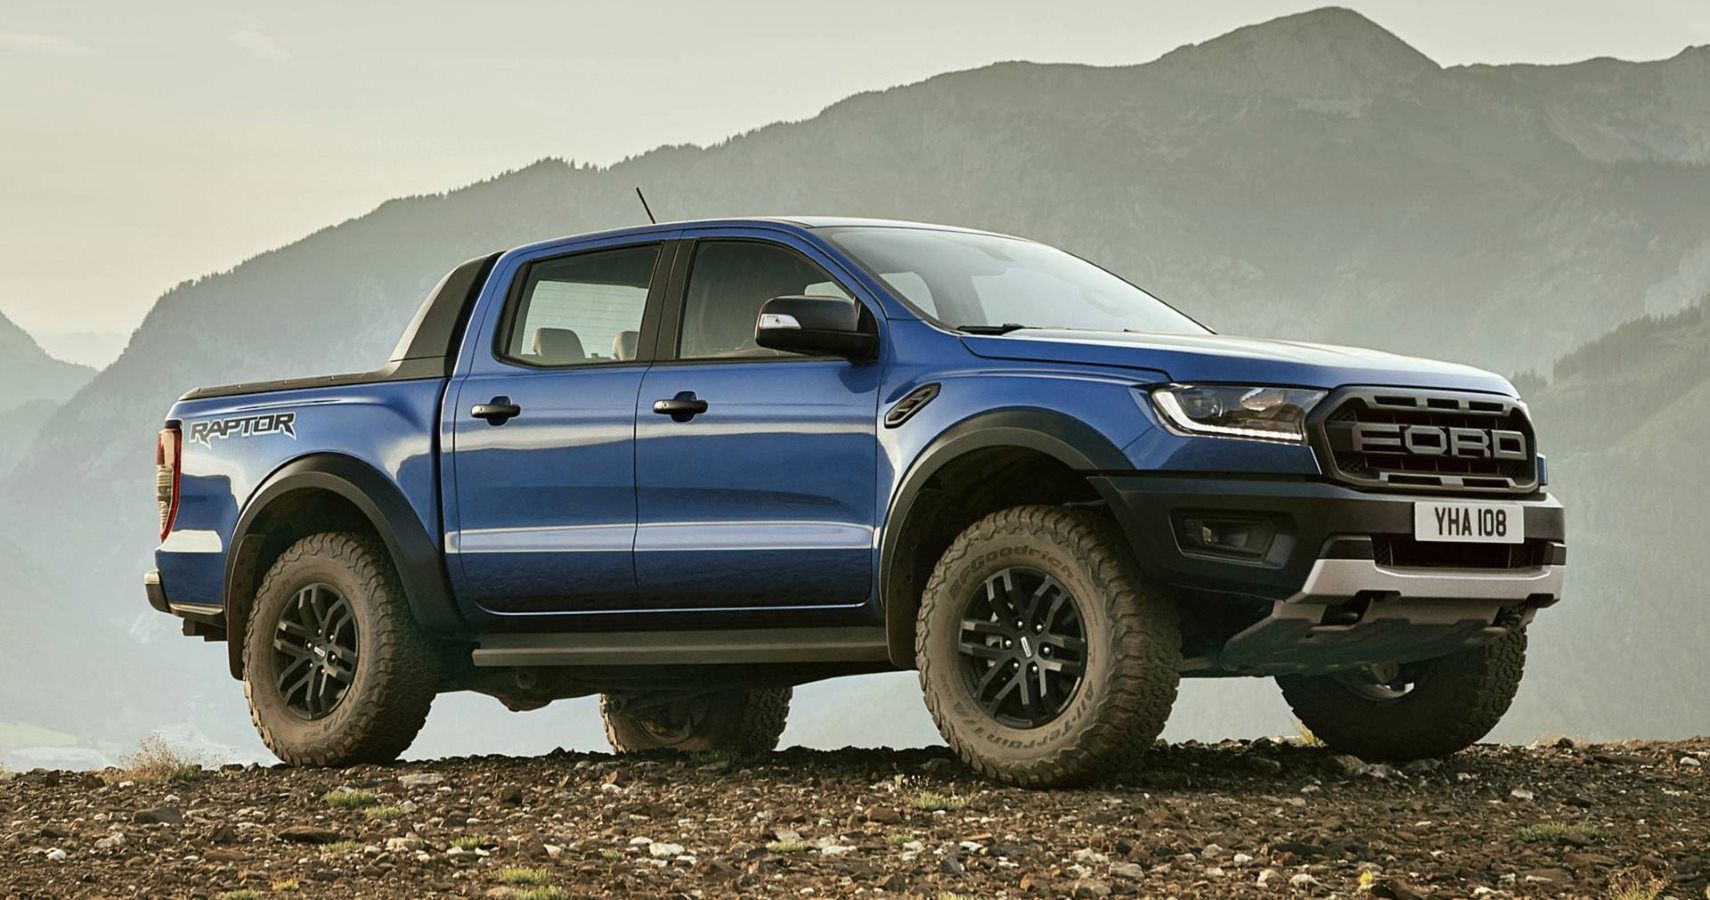 Ranger Raptor May Actually Come To U.S. Down The Line